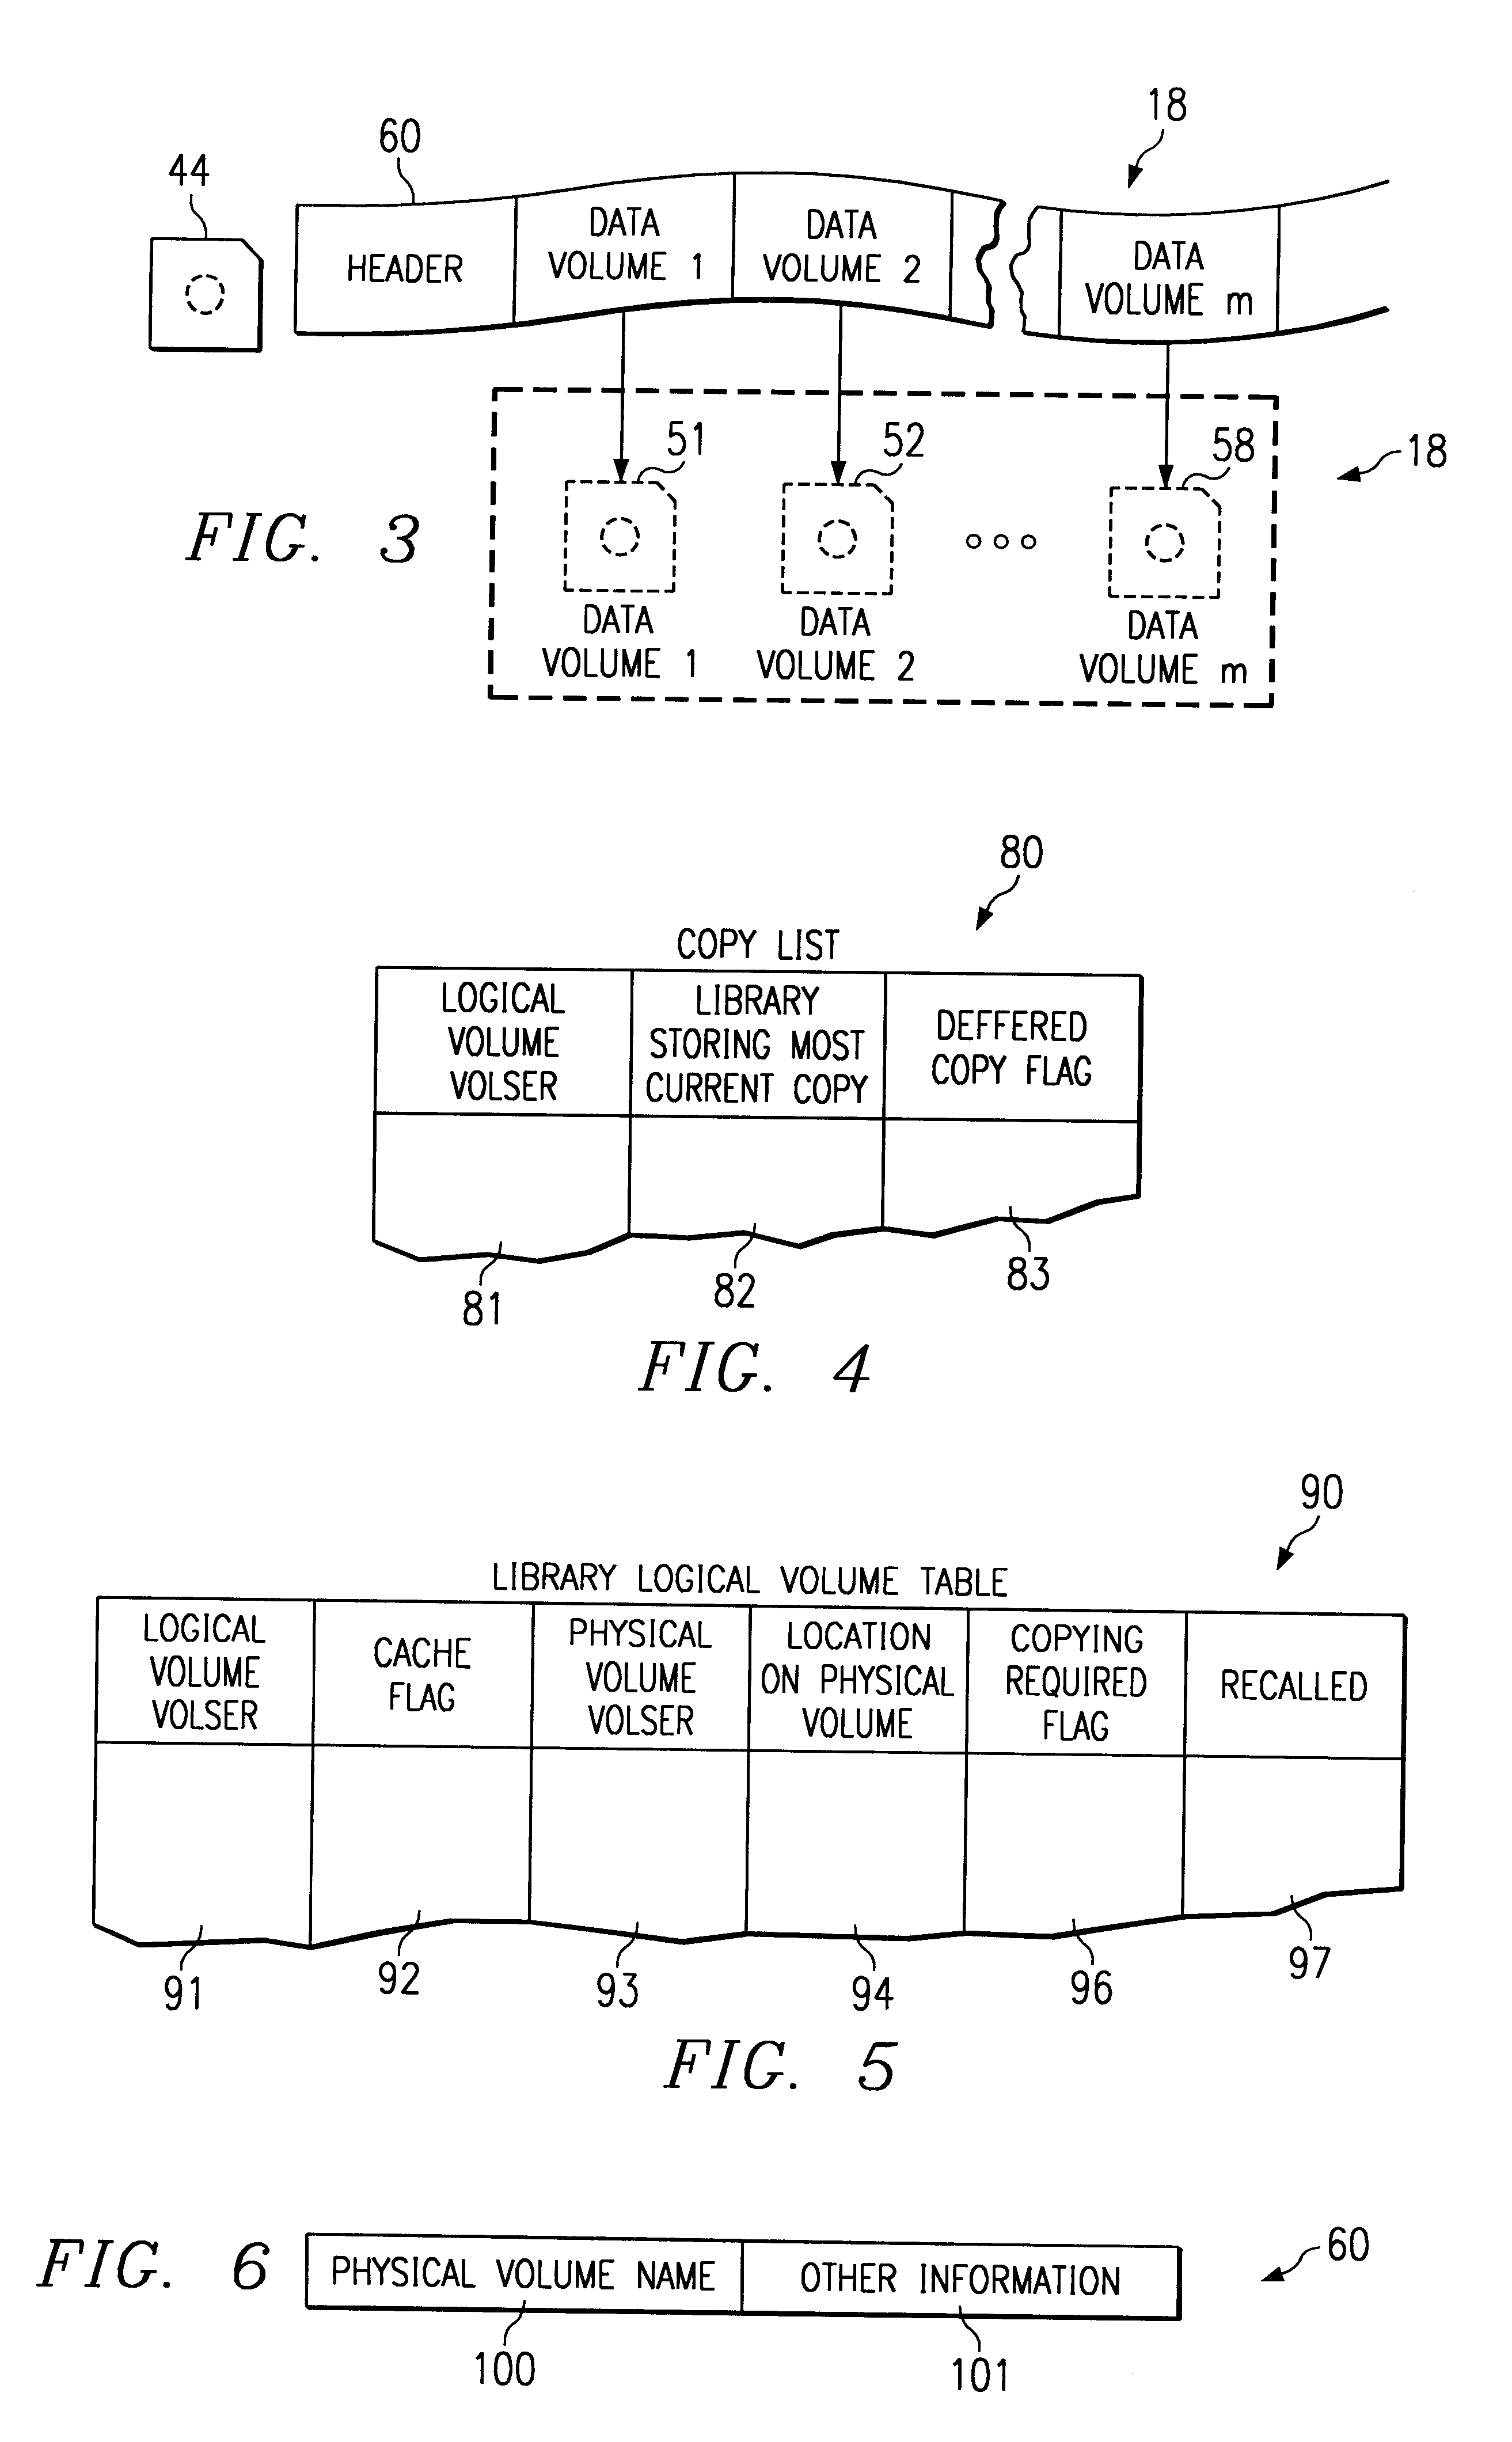 Recalling logical volumes to cache from physical media volumes for redundant storage in automated data storage libraries